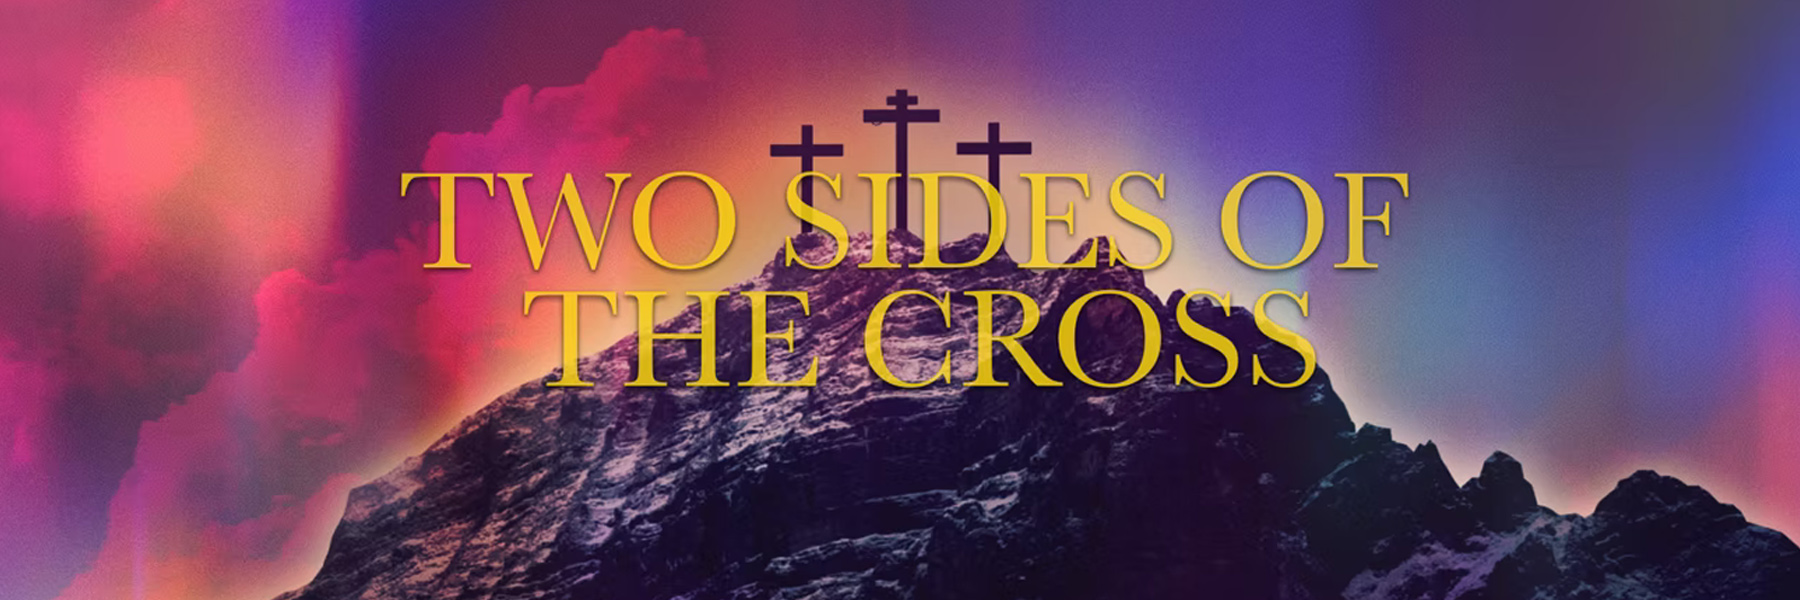 Two Sides of the Cross